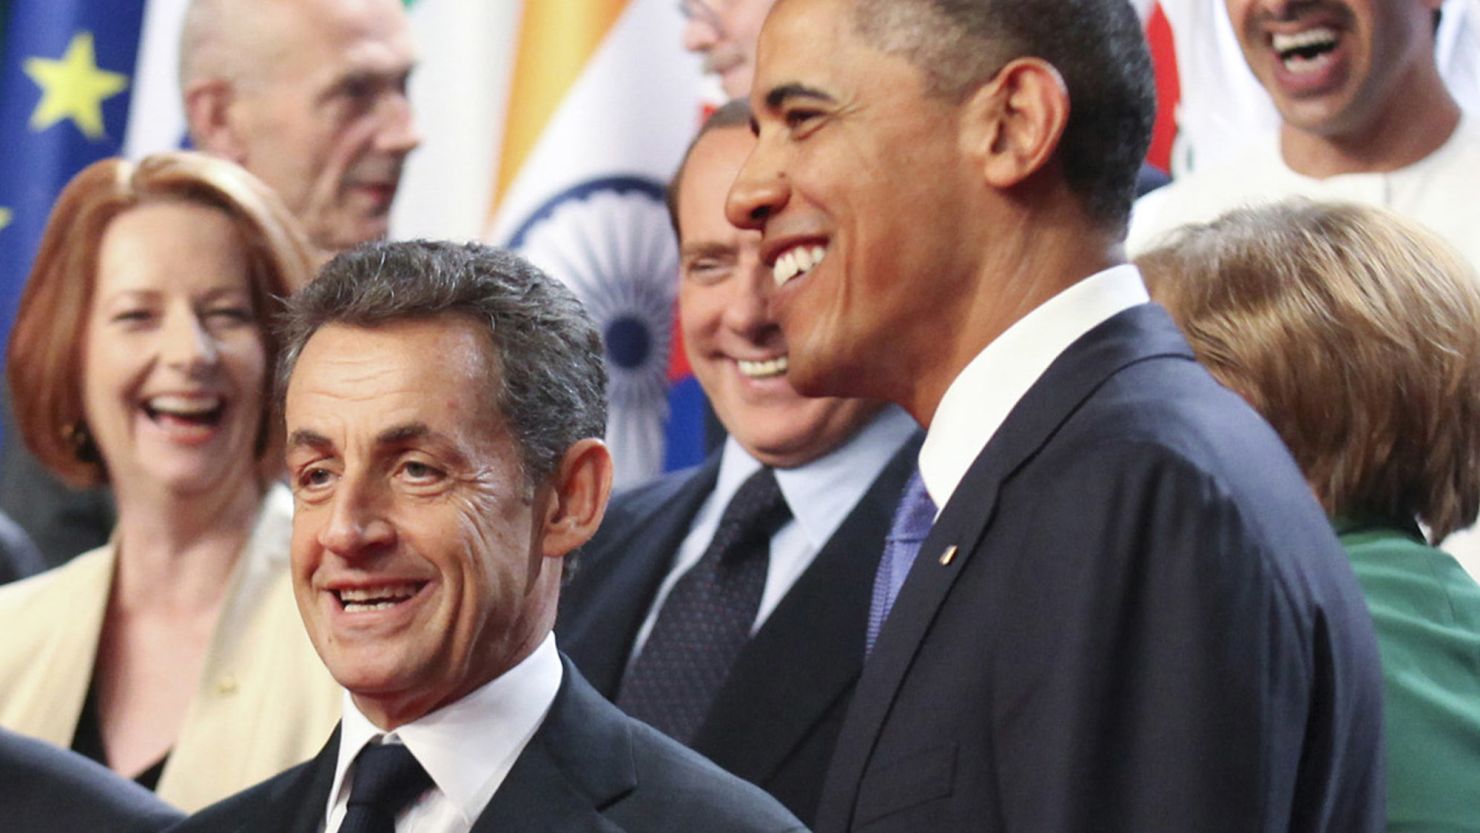 French President Nicolas Sarkozy and U.S. President Barack Obama were caught off-guard at the G20 summit .